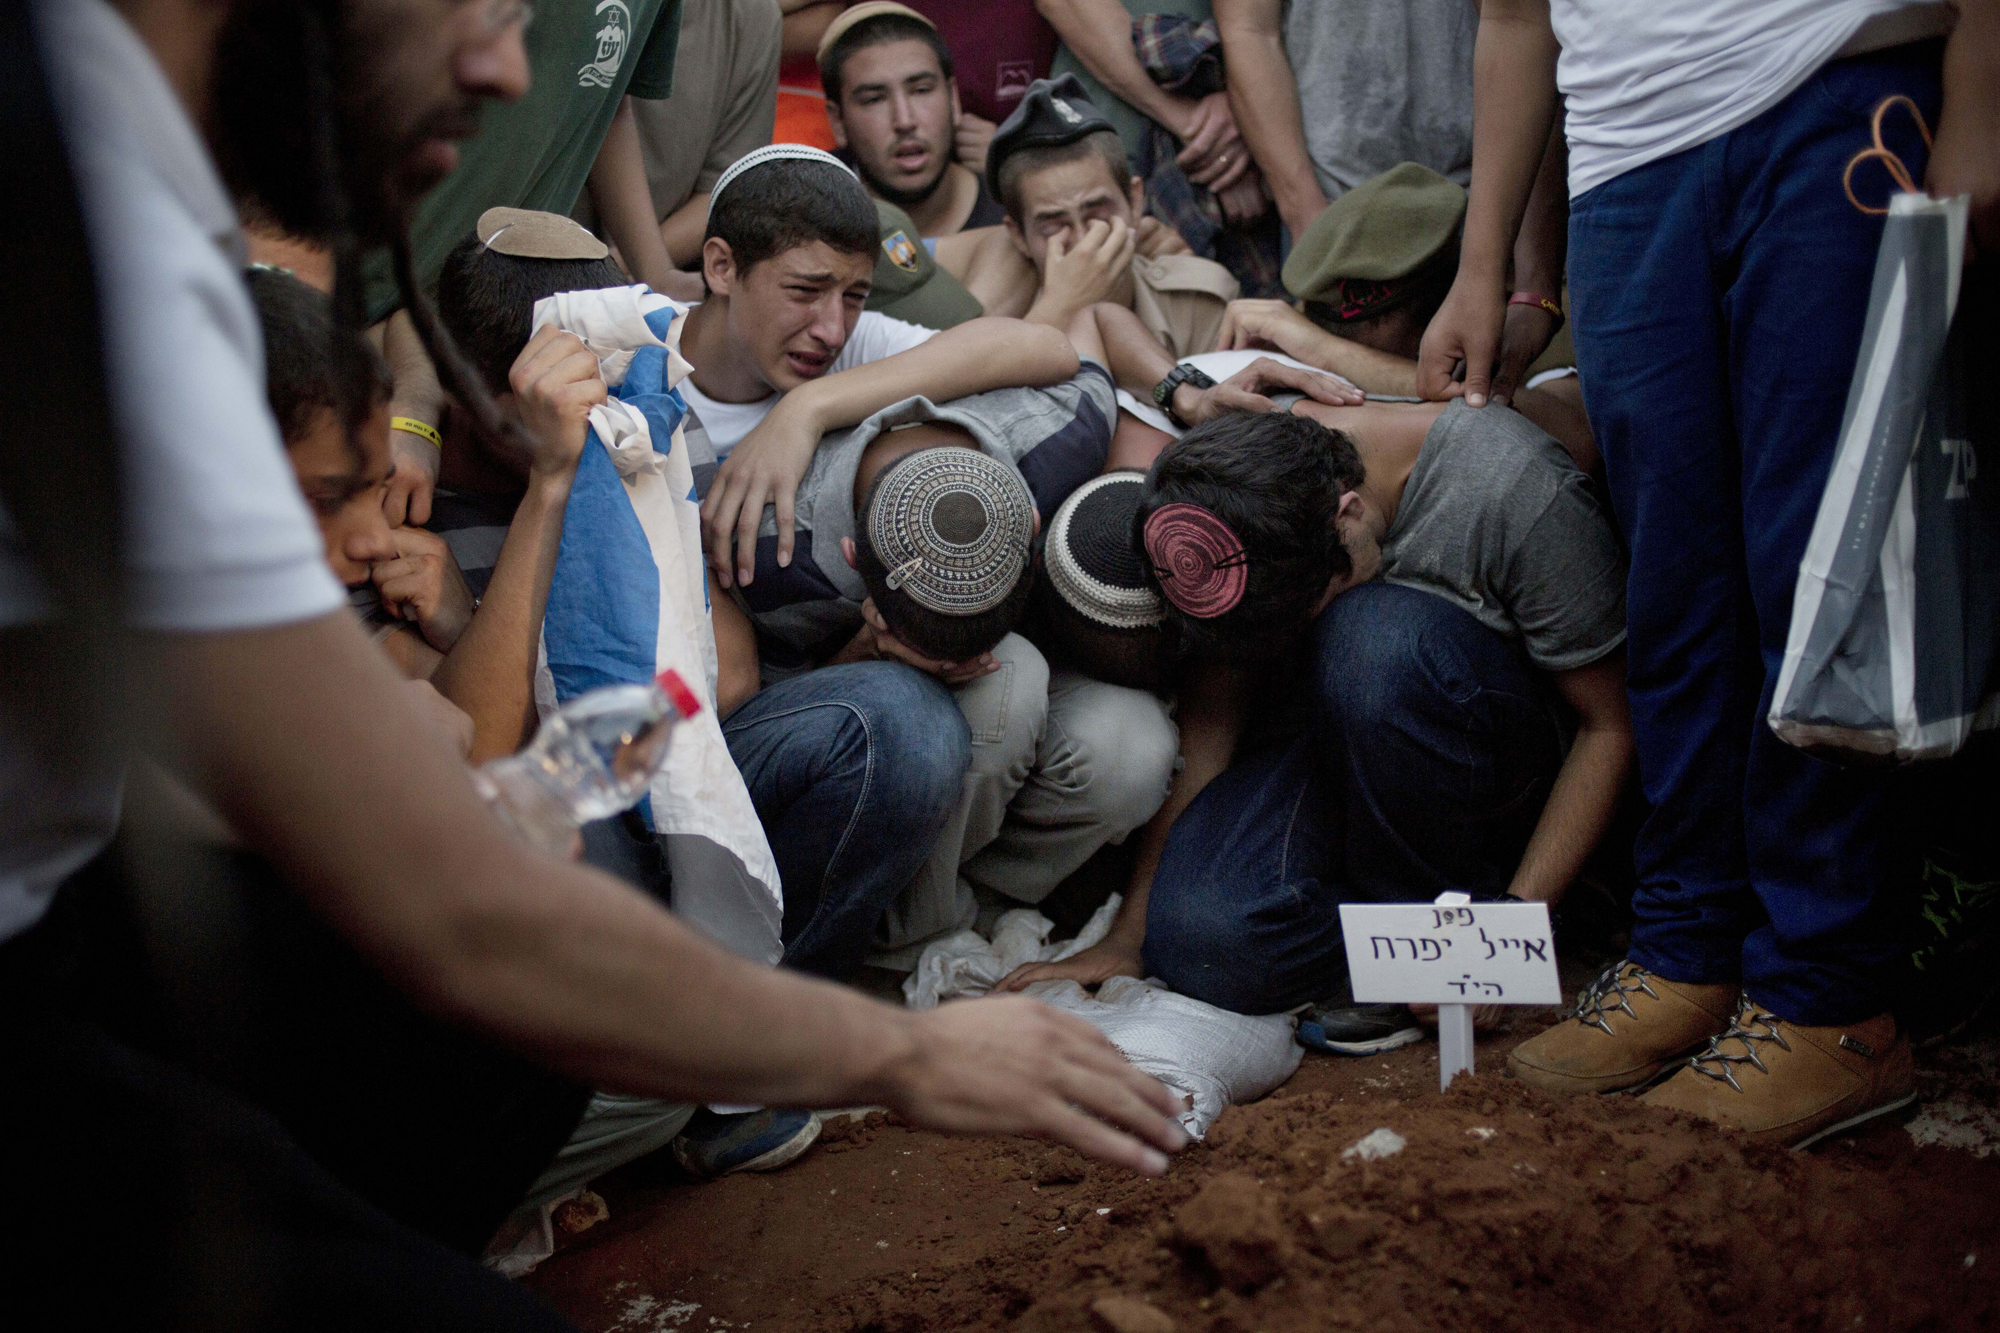 Family and friends of Eyal Yifrah, Gilad Shaar, and Naftali Fraenkel , three Israeli teenagers who were abducted over two weeks ago mourn over the grave of Eyal Yifrah during their funeral in Modiin, Israel, July 1.